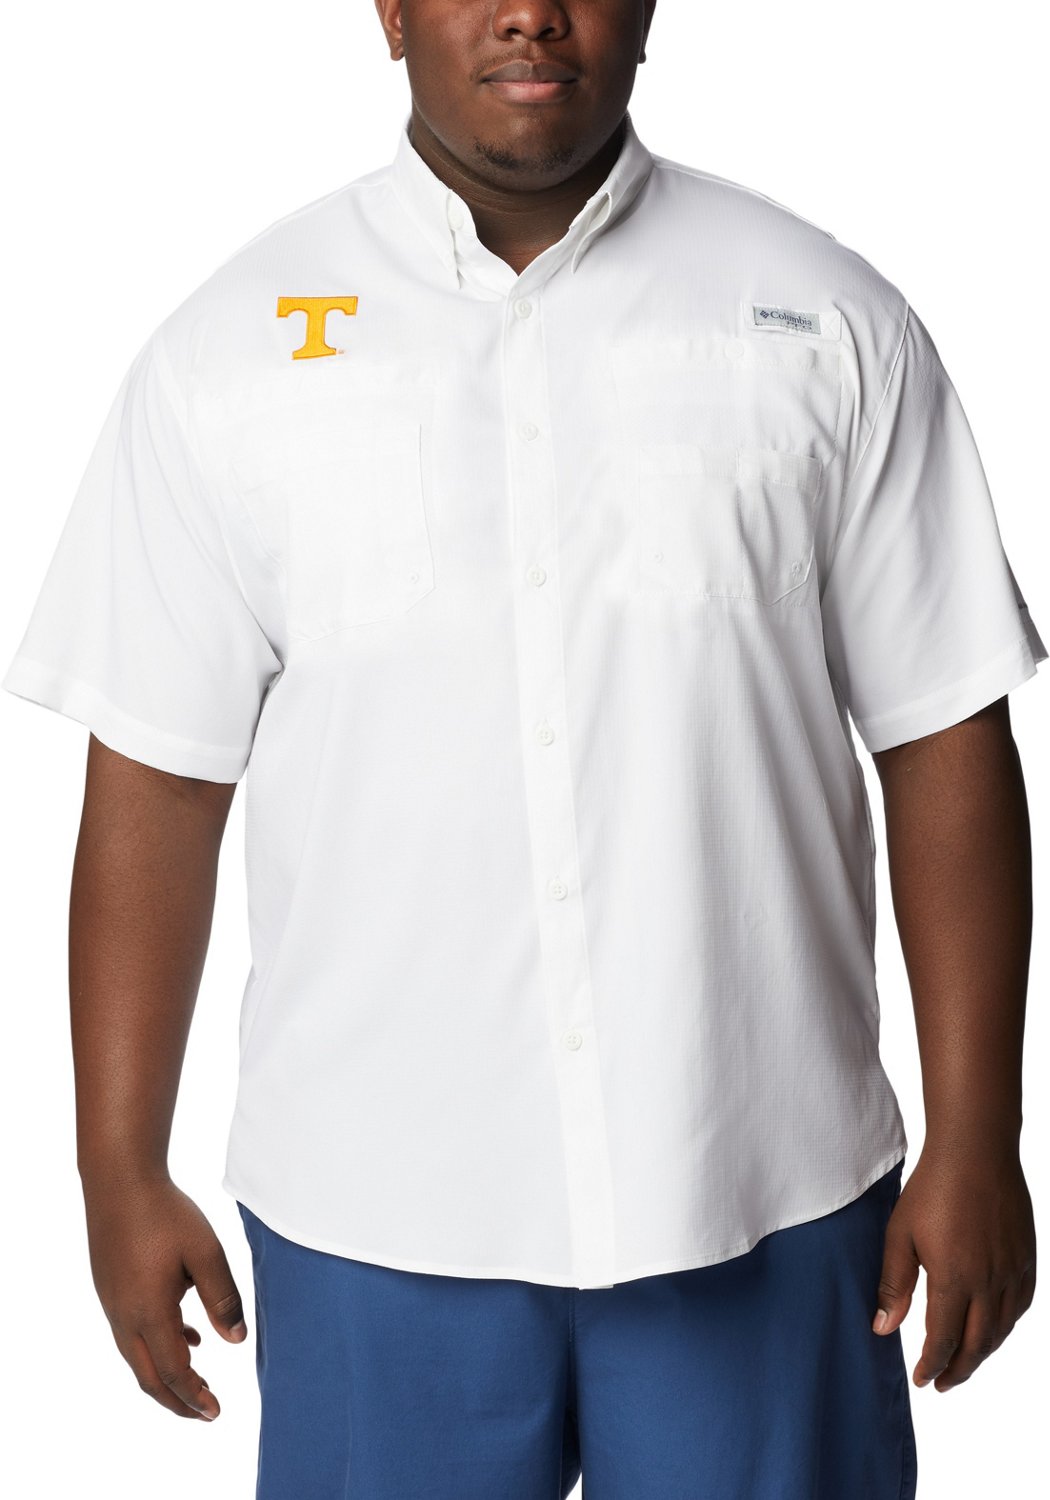 Columbia Sportswear Men's University of Tennessee Tamiami Big and Tall Shirt